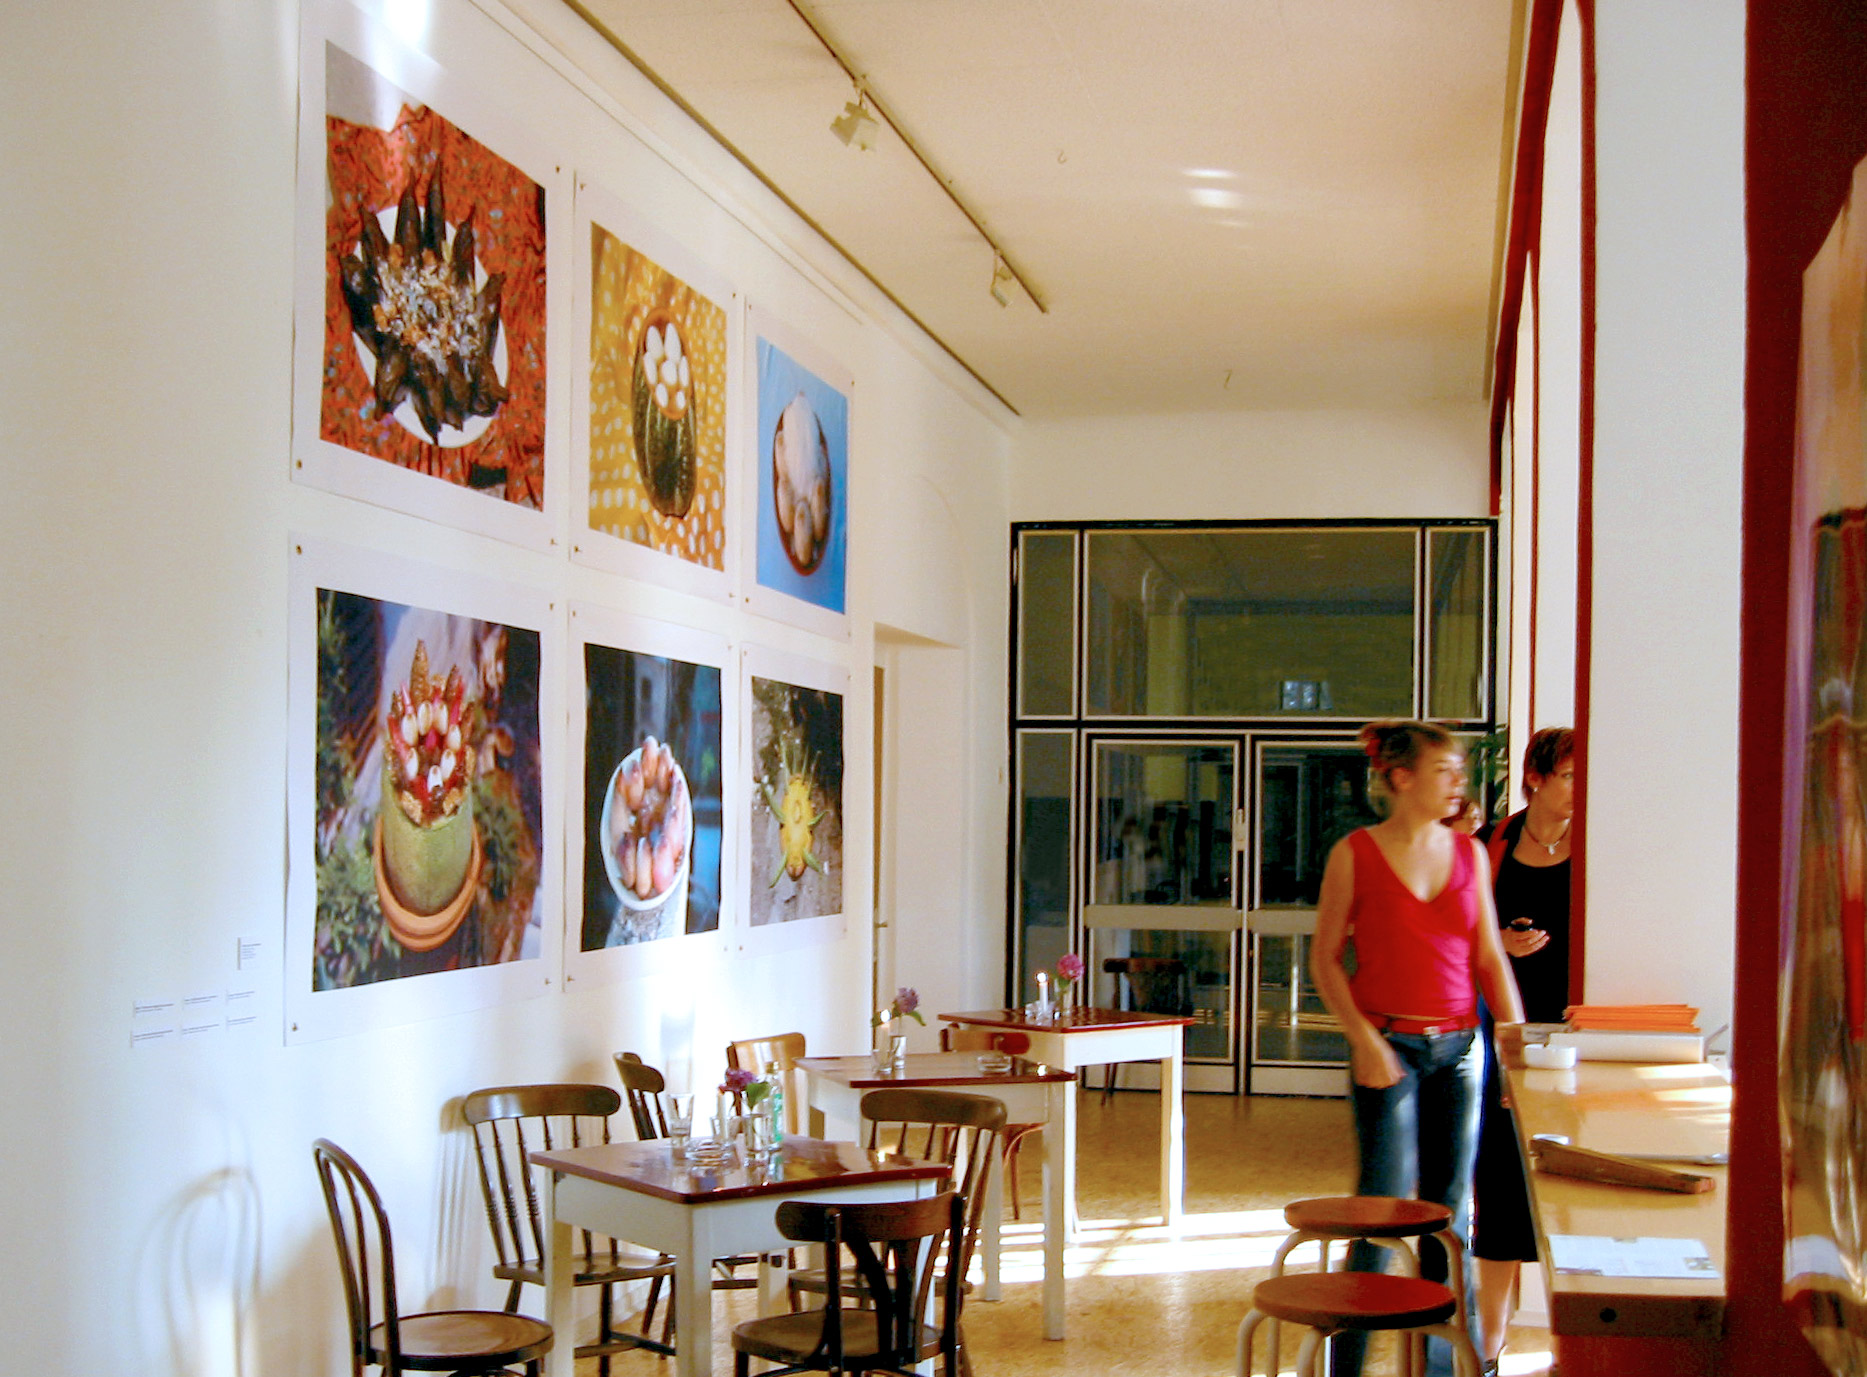 View of the photographic series Dishes for the Dead, as part of the Input exhibition, in Kunsthaus Essen, Germany, 2005